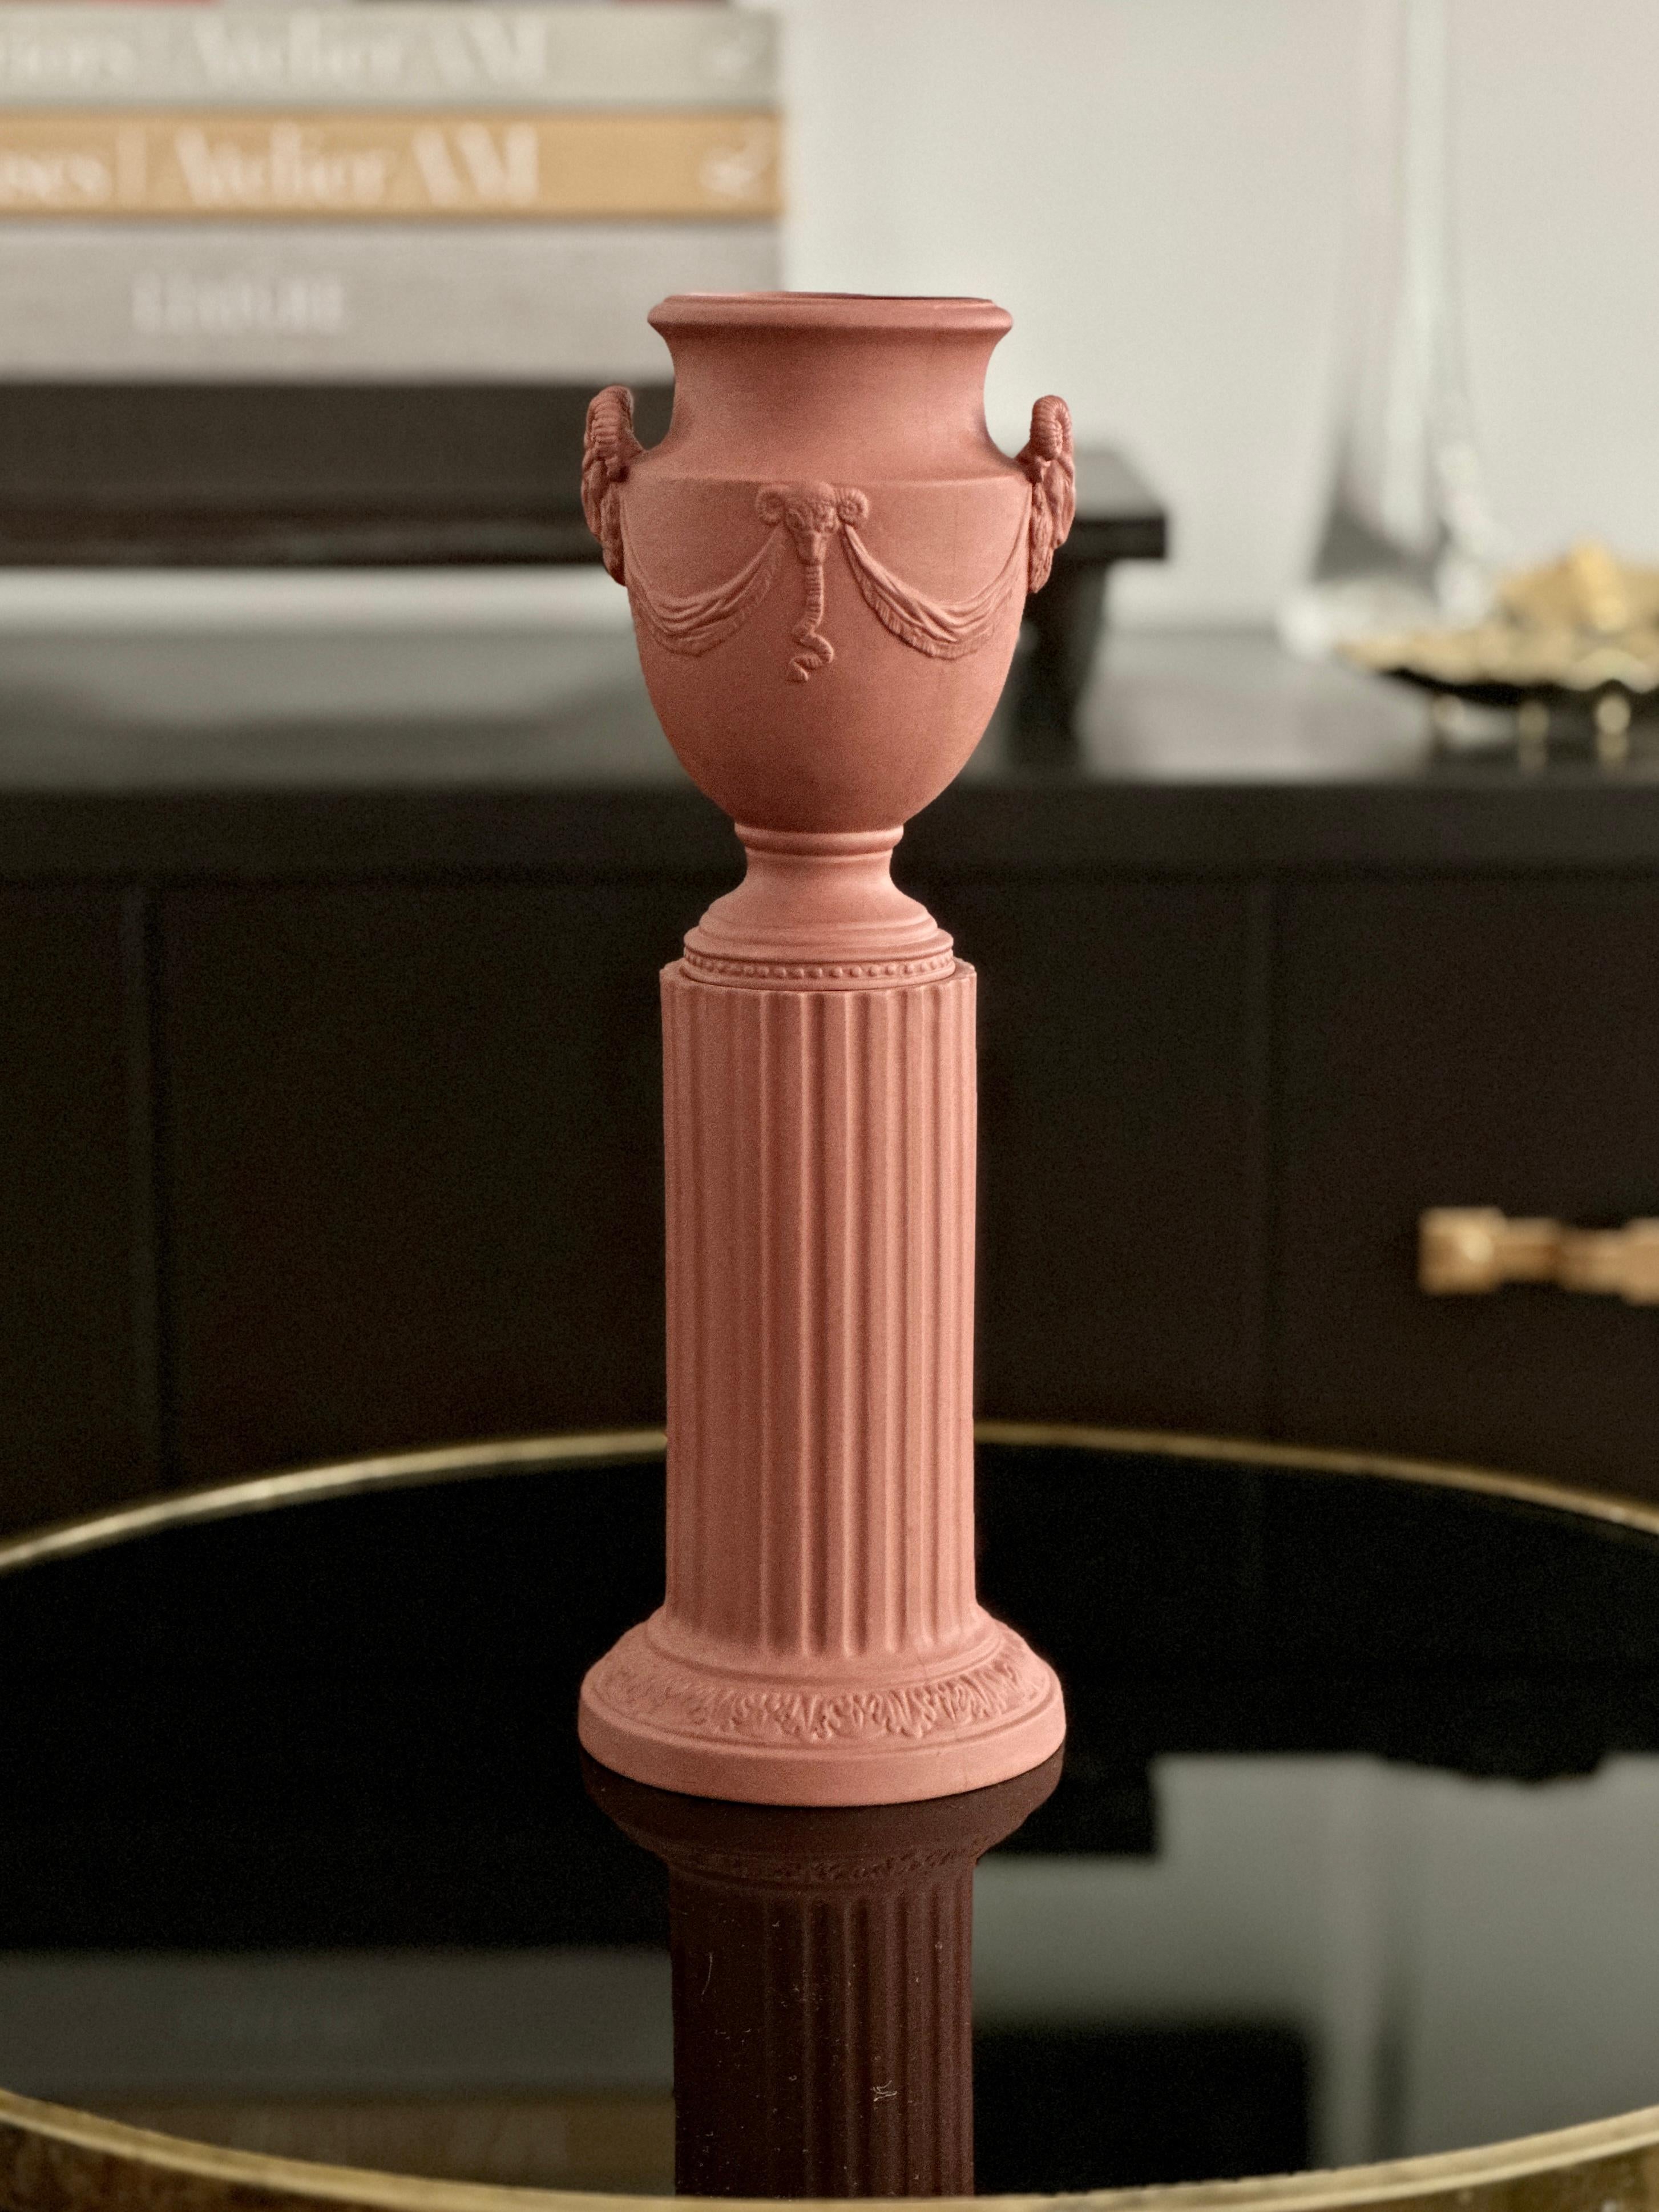 Vintage diminutive terracotta pedestal and urn from Mottahedeh. The urn and pedestal is approximately 11 3/4 inches tall, the urn is 5 3/4 inches tall and the pedestal is 6 inches tall, at its widest is 4 inches. Under the base is a Mottahedeh stamp